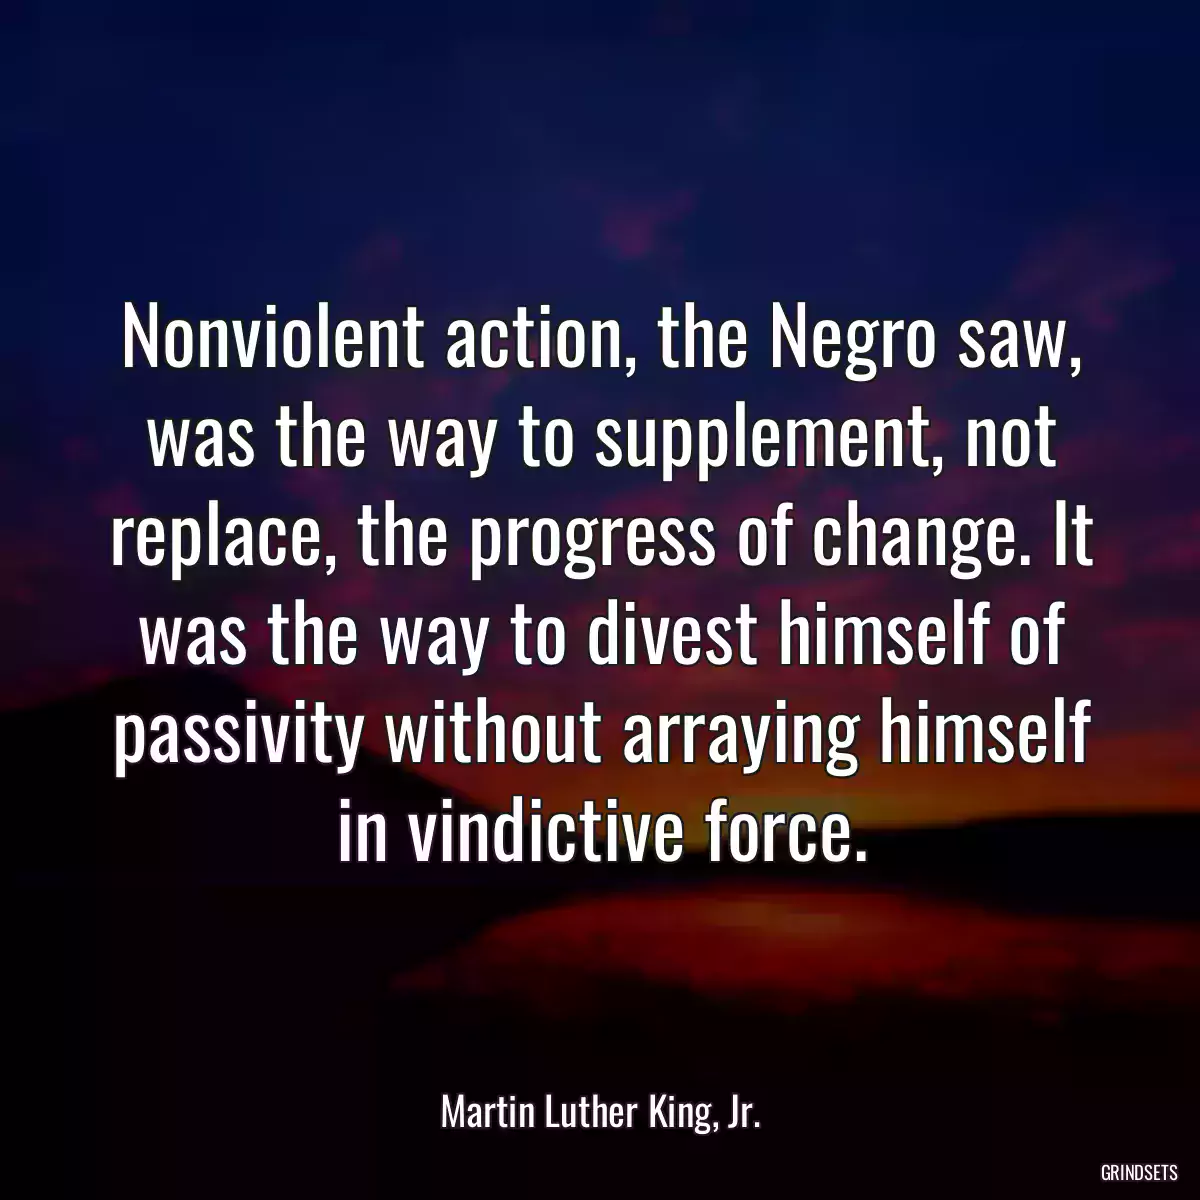 Nonviolent action, the Negro saw, was the way to supplement, not replace, the progress of change. It was the way to divest himself of passivity without arraying himself in vindictive force.